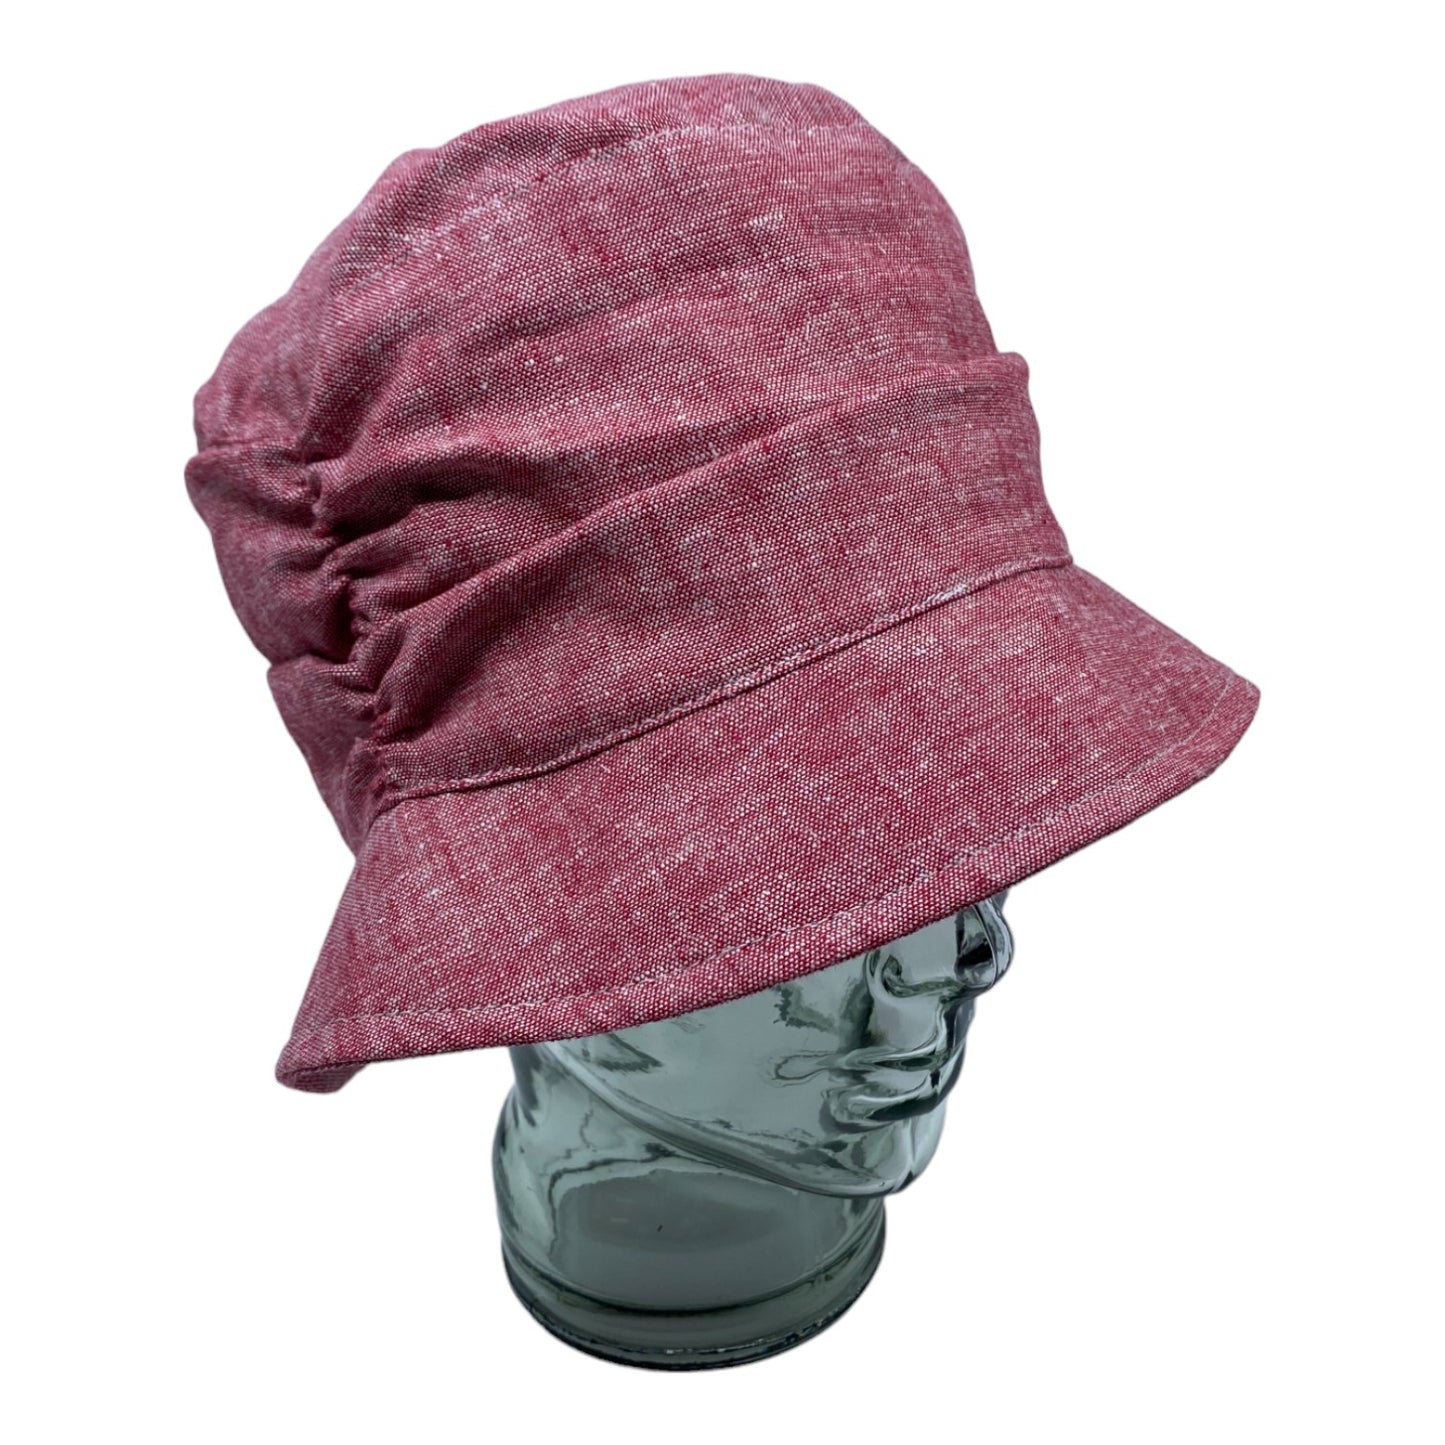 High-quality, adjustable linen summer cloche hat with UV50+ sun protection. Made in Quebec, Montreal, Canada by Geneviève Dostaler. Available in many colors. Perfect for completing your look with style and comfort.